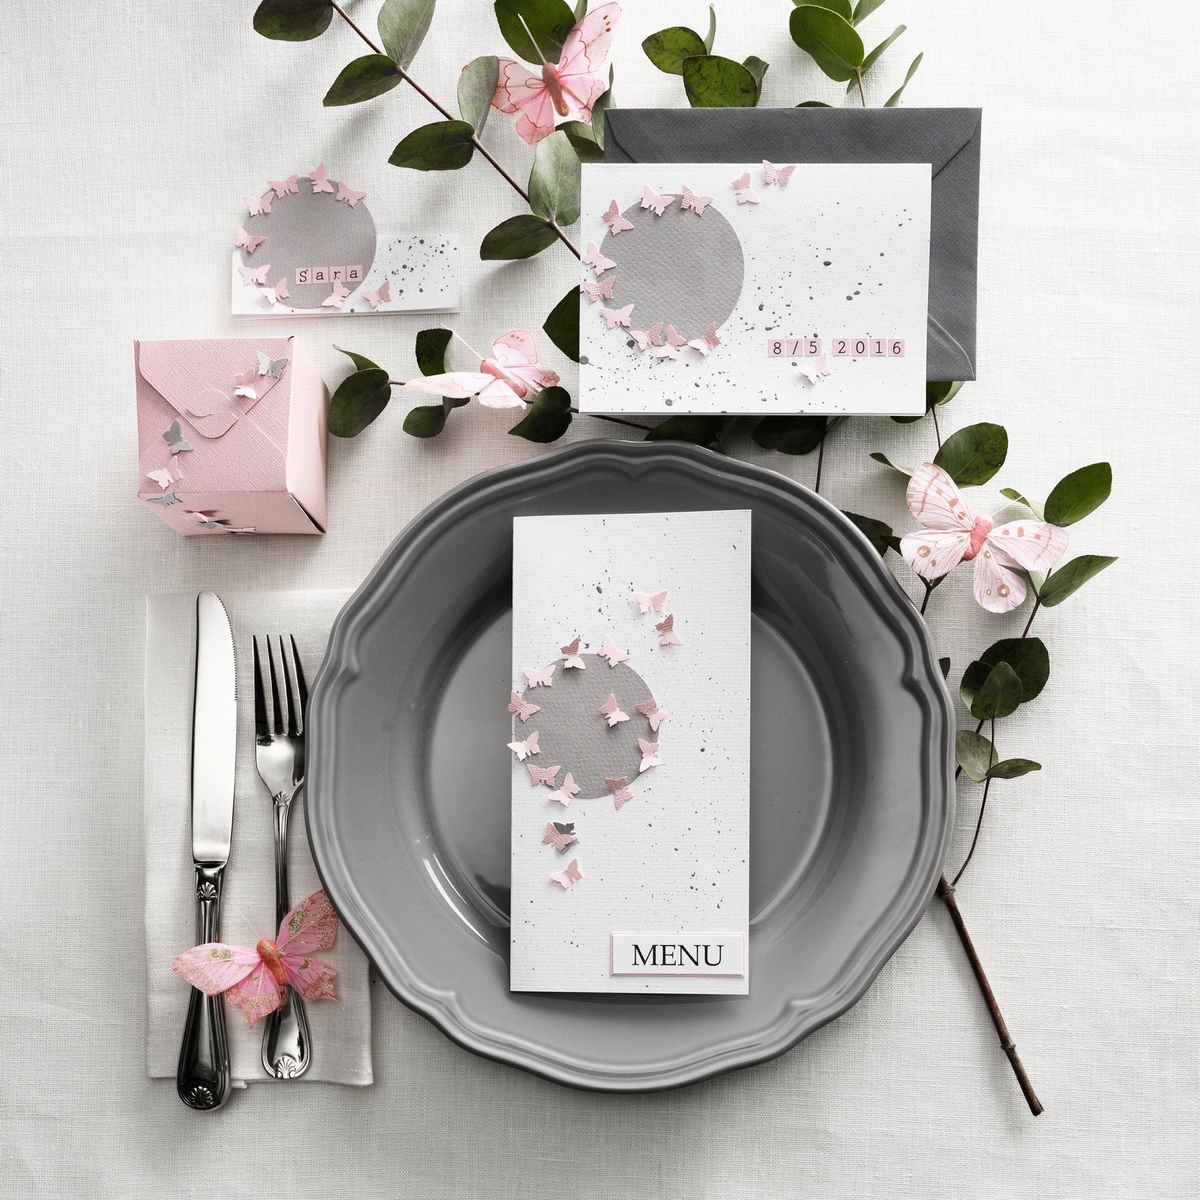 Confirmation tablescape with butterflies